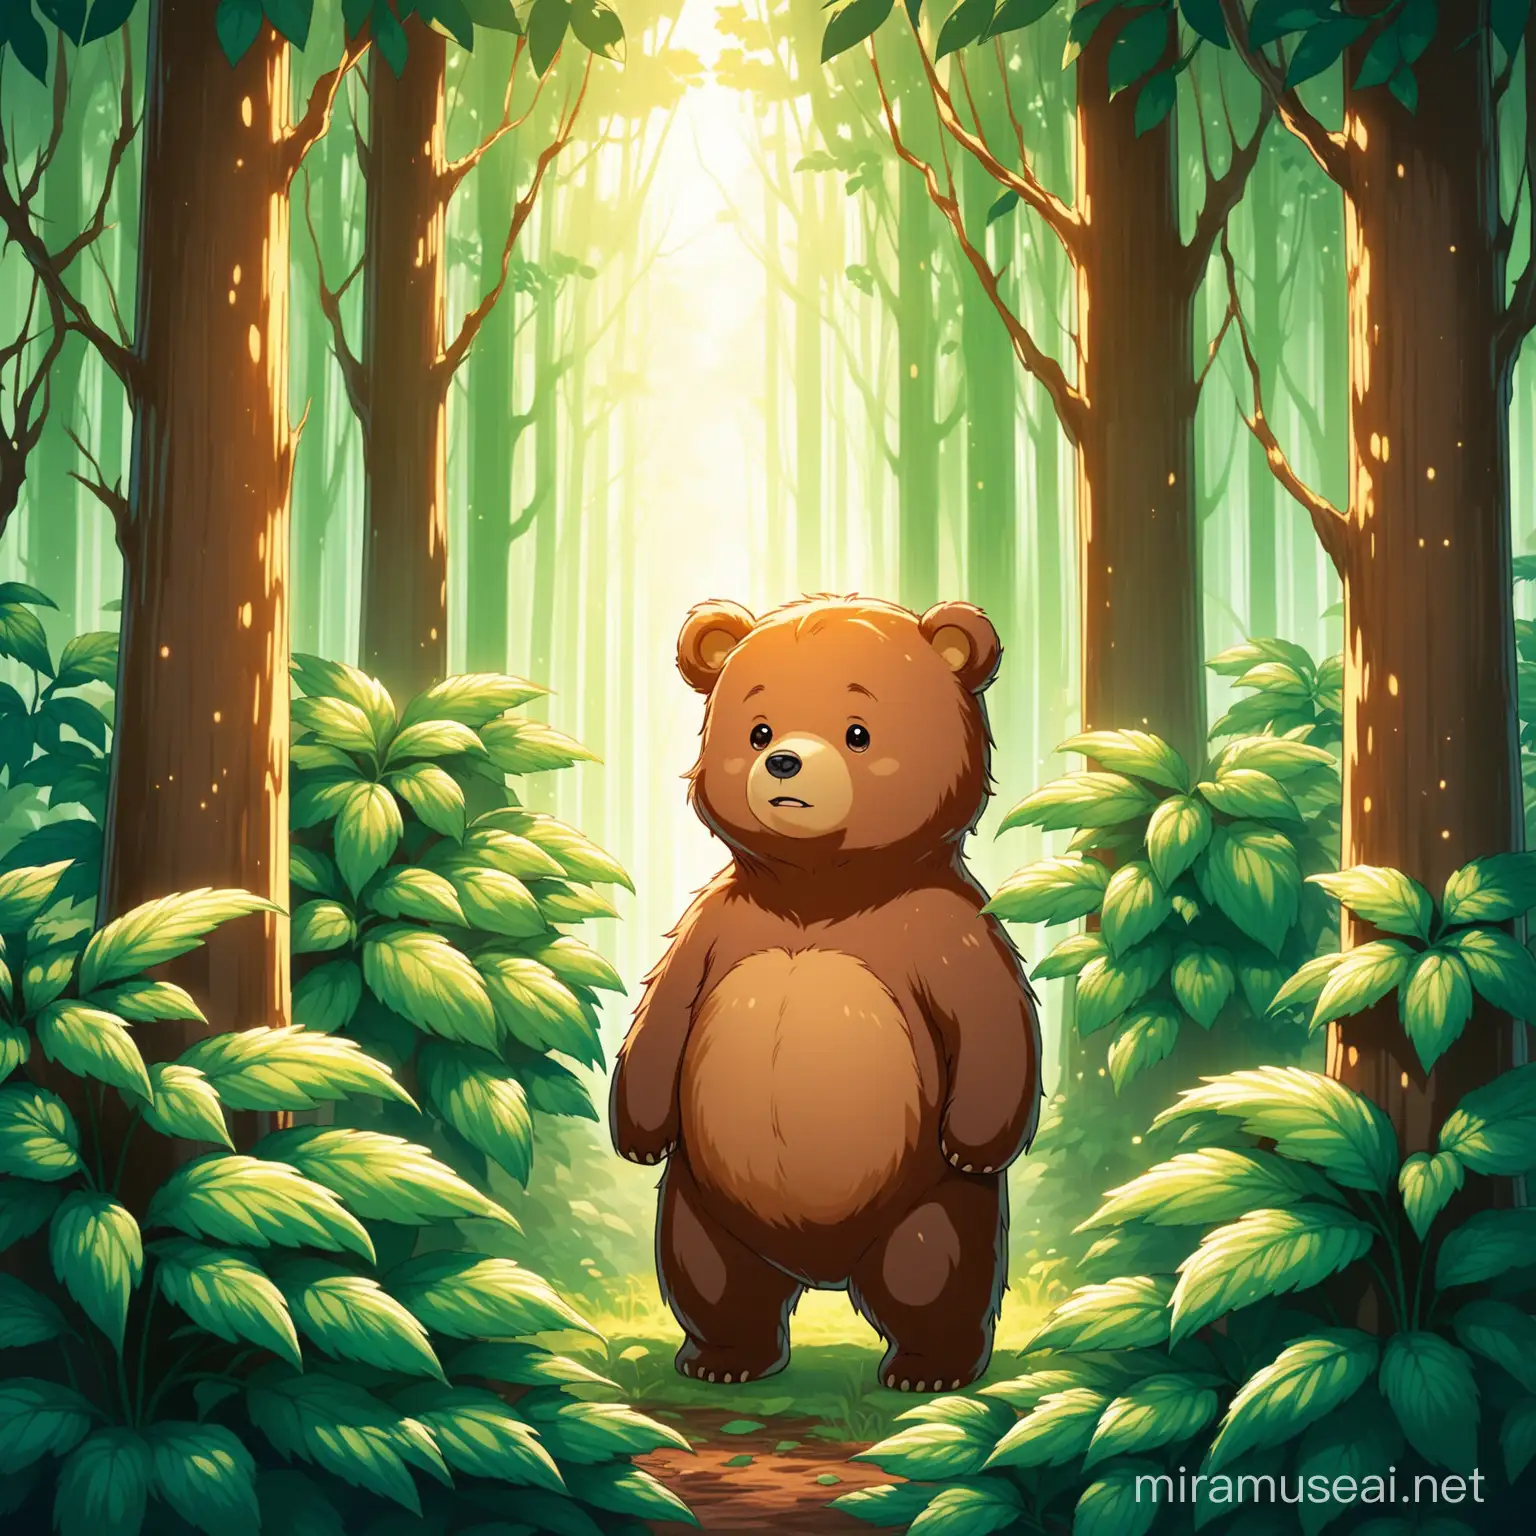 Curious Little Bear in Mysterious Forest